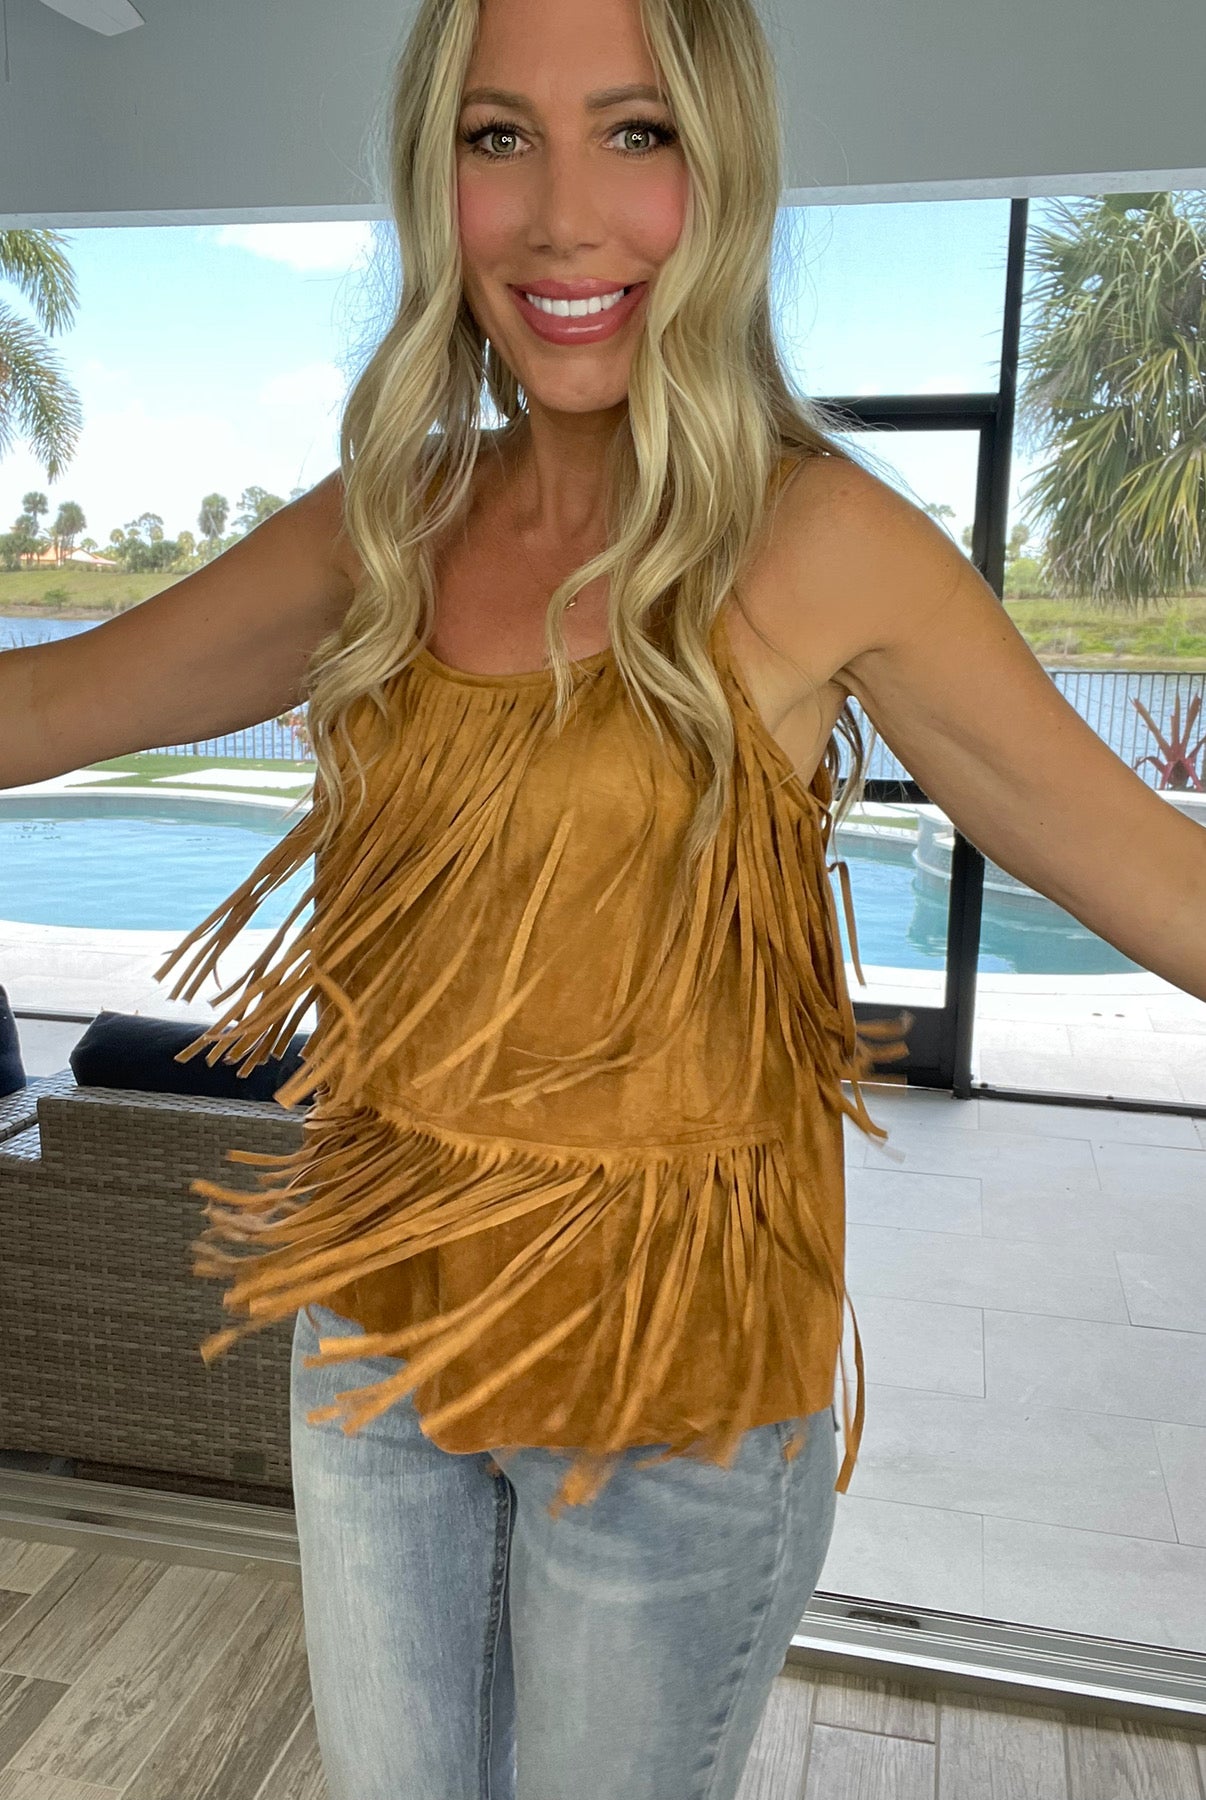 Cowboy Glam Fringe Tank-130 Cami's/Bralettes/Bodysuits- Simply Simpson's Boutique is a Women's Online Fashion Boutique Located in Jupiter, Florida